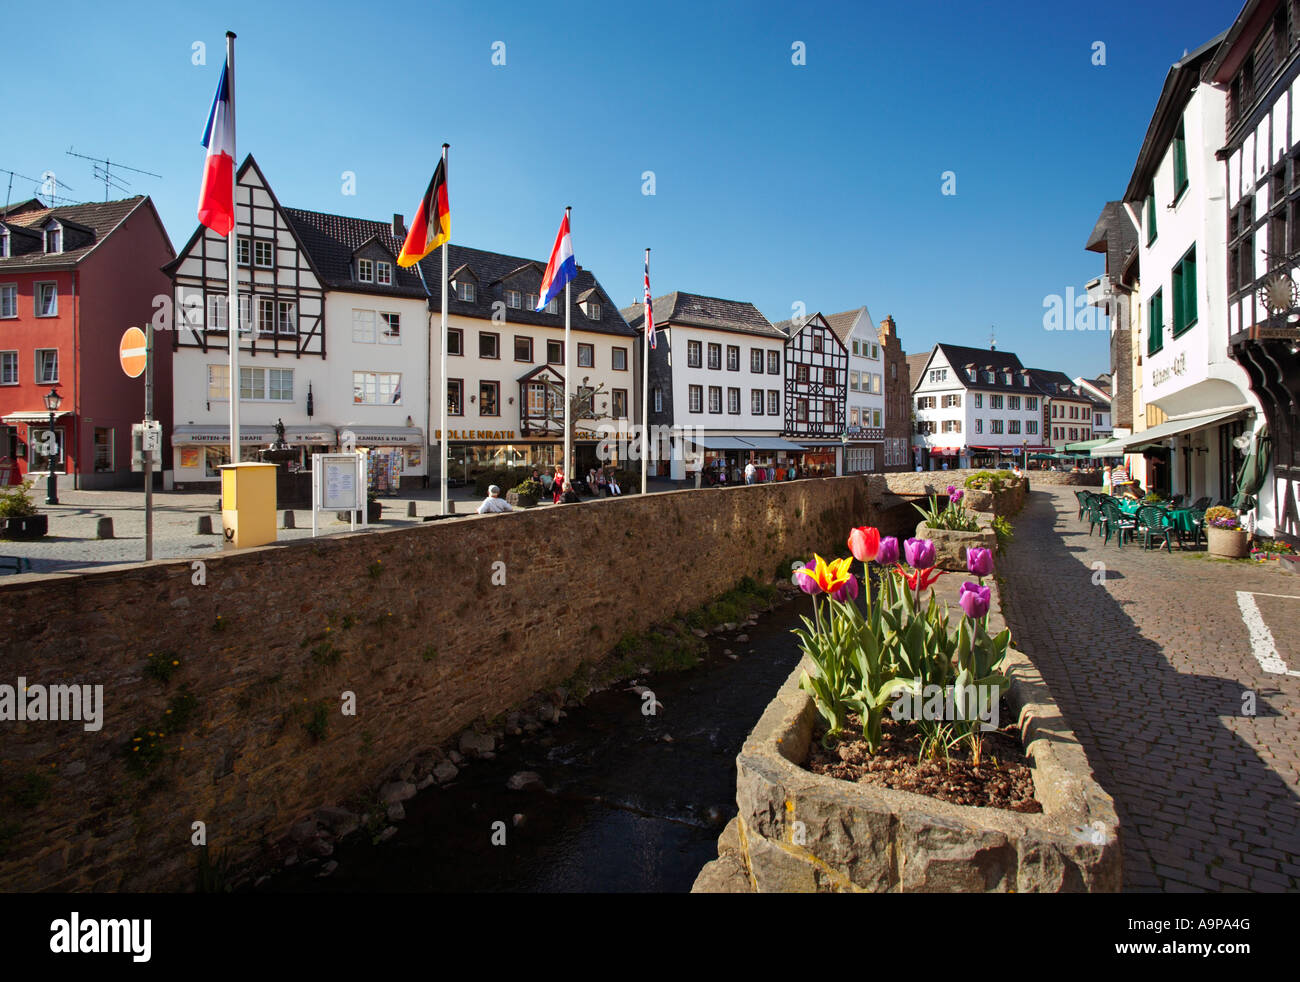 Bad Munstereifel an old German town in the Rhineland, Germany on the River Erft Stock Photo